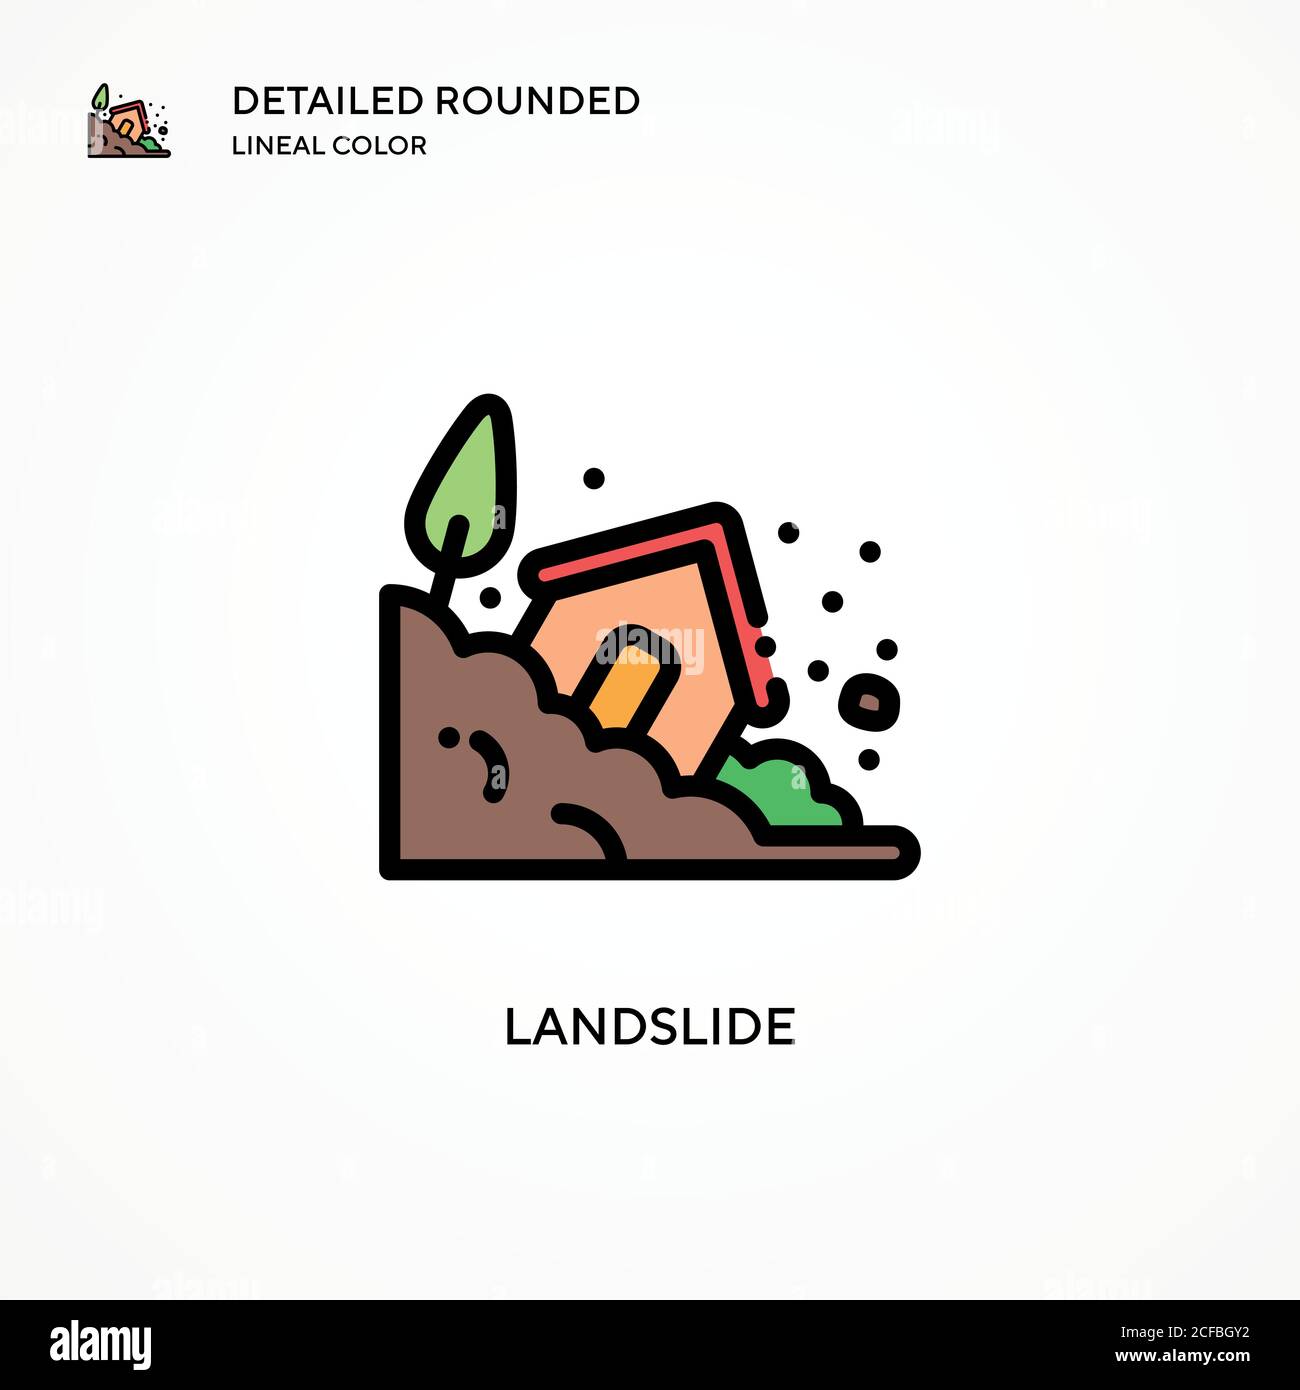 How to Draw a Landslide - Really Easy Drawing Tutorial